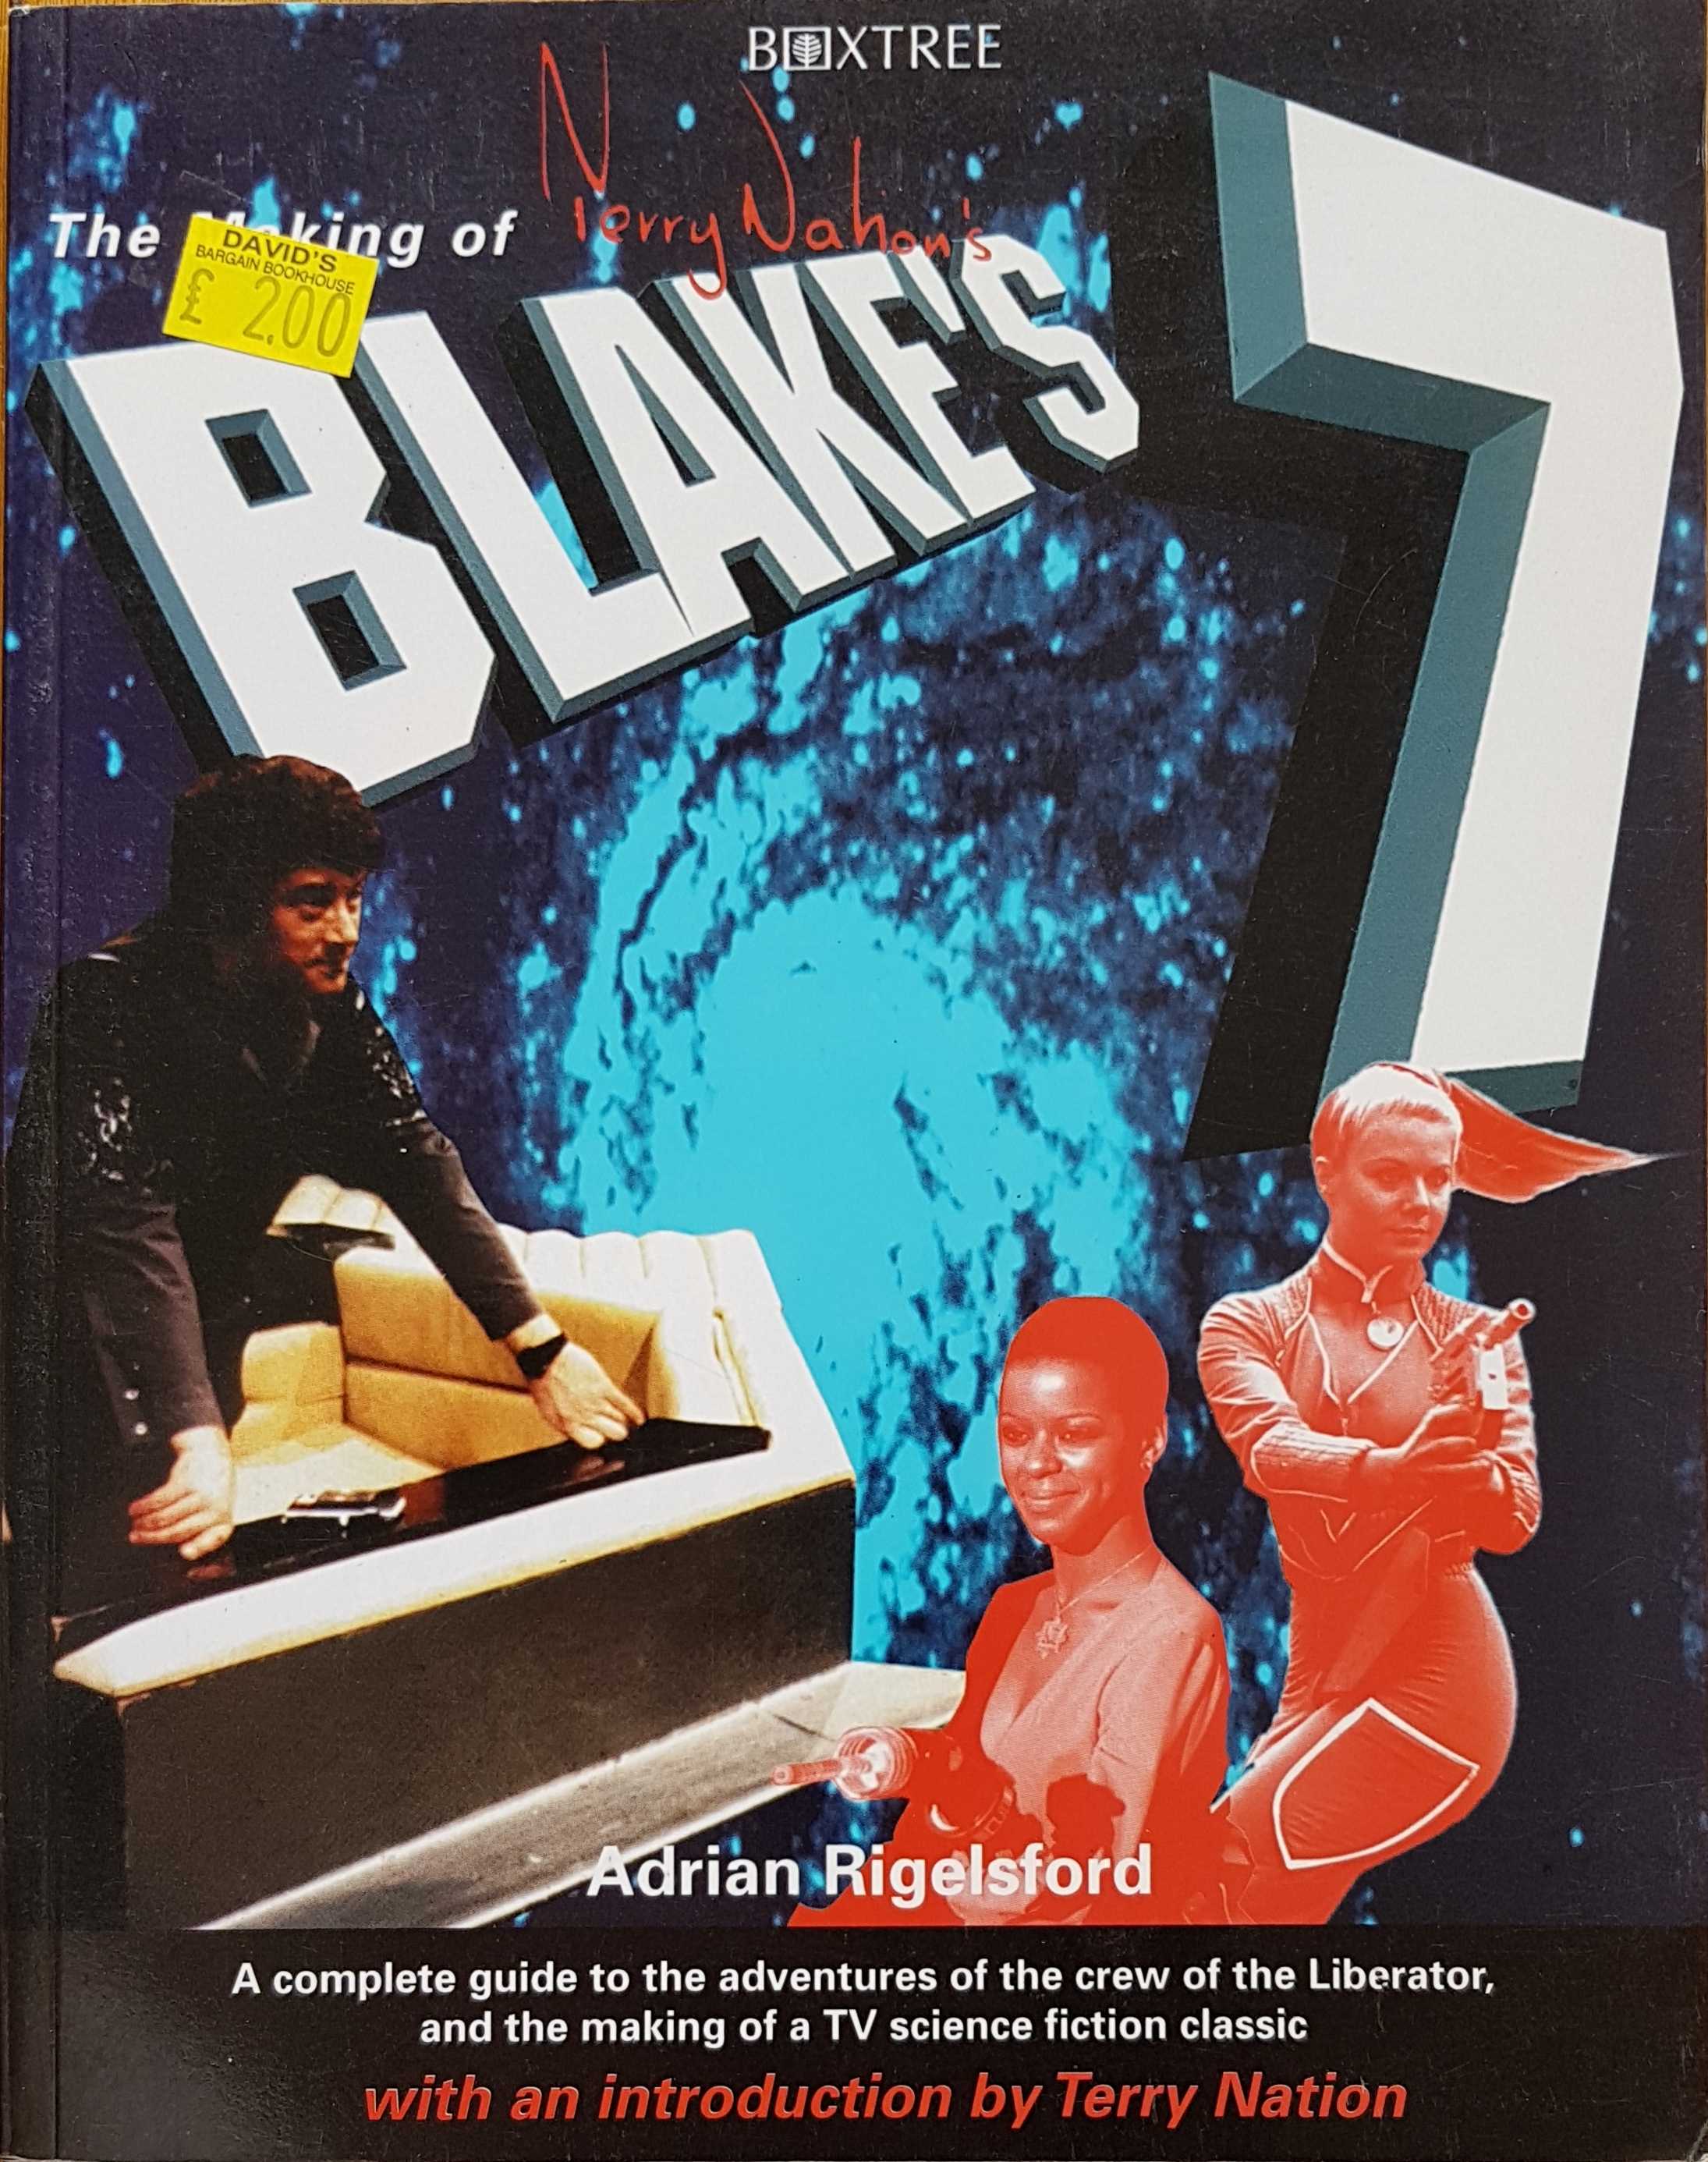 Picture of 0-7522-0891-8 Blake's 7 - The making of by artist Adrian Rigeksford from the BBC books - Records and Tapes library